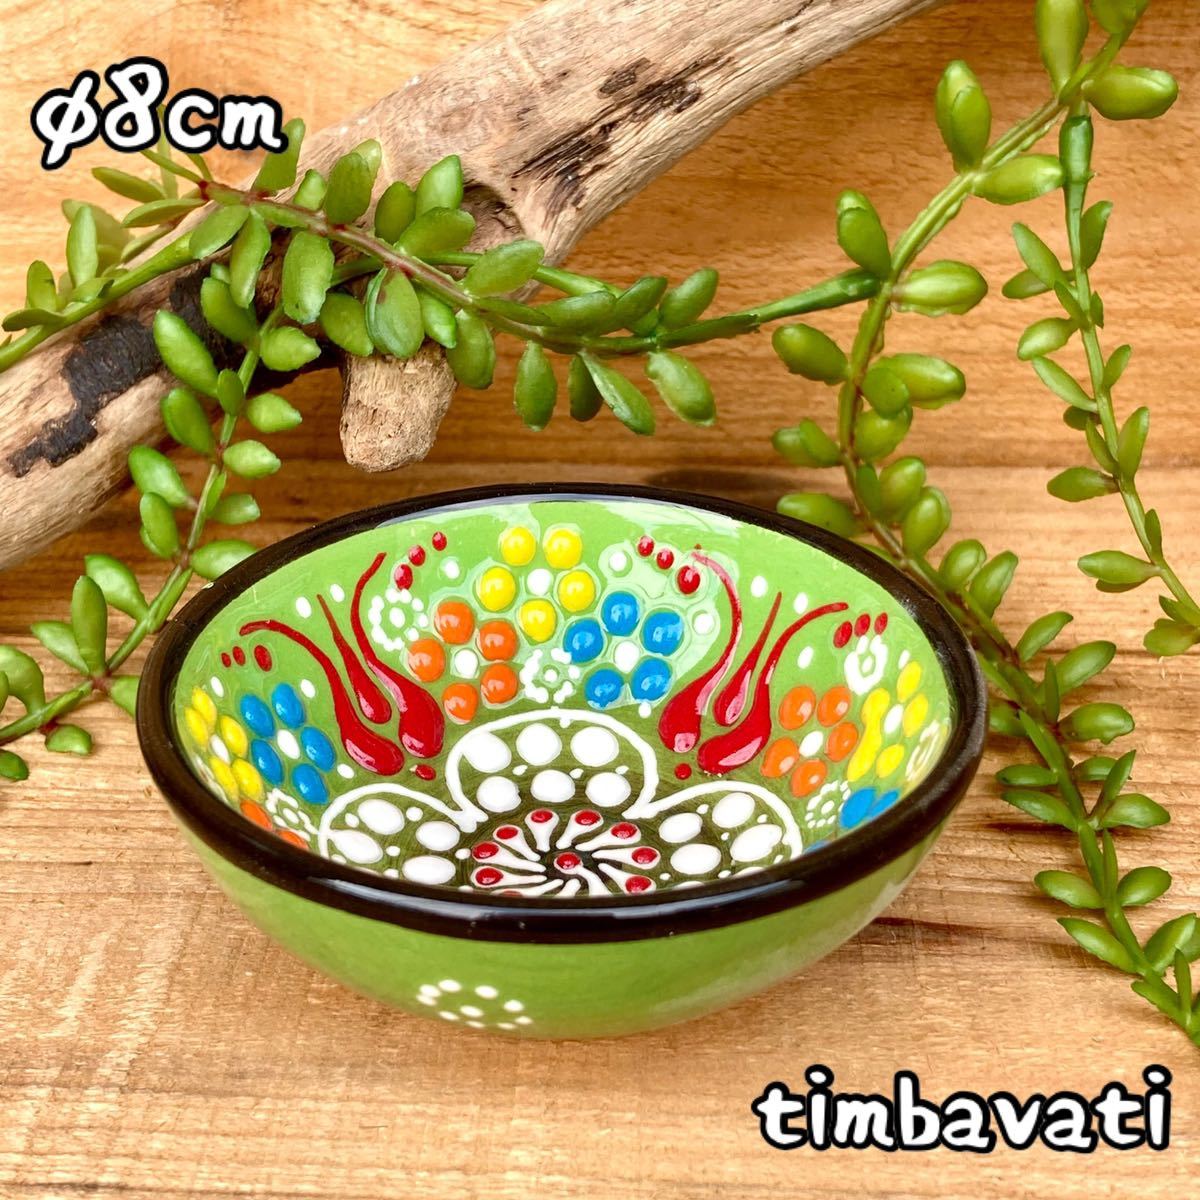 8cm☆Brand new☆Turkish pottery bowl, accessory holder, small plate, handmade, Kutahya pottery, light green [Free shipping under certain conditions] 193, Western-style tableware, bowl, others